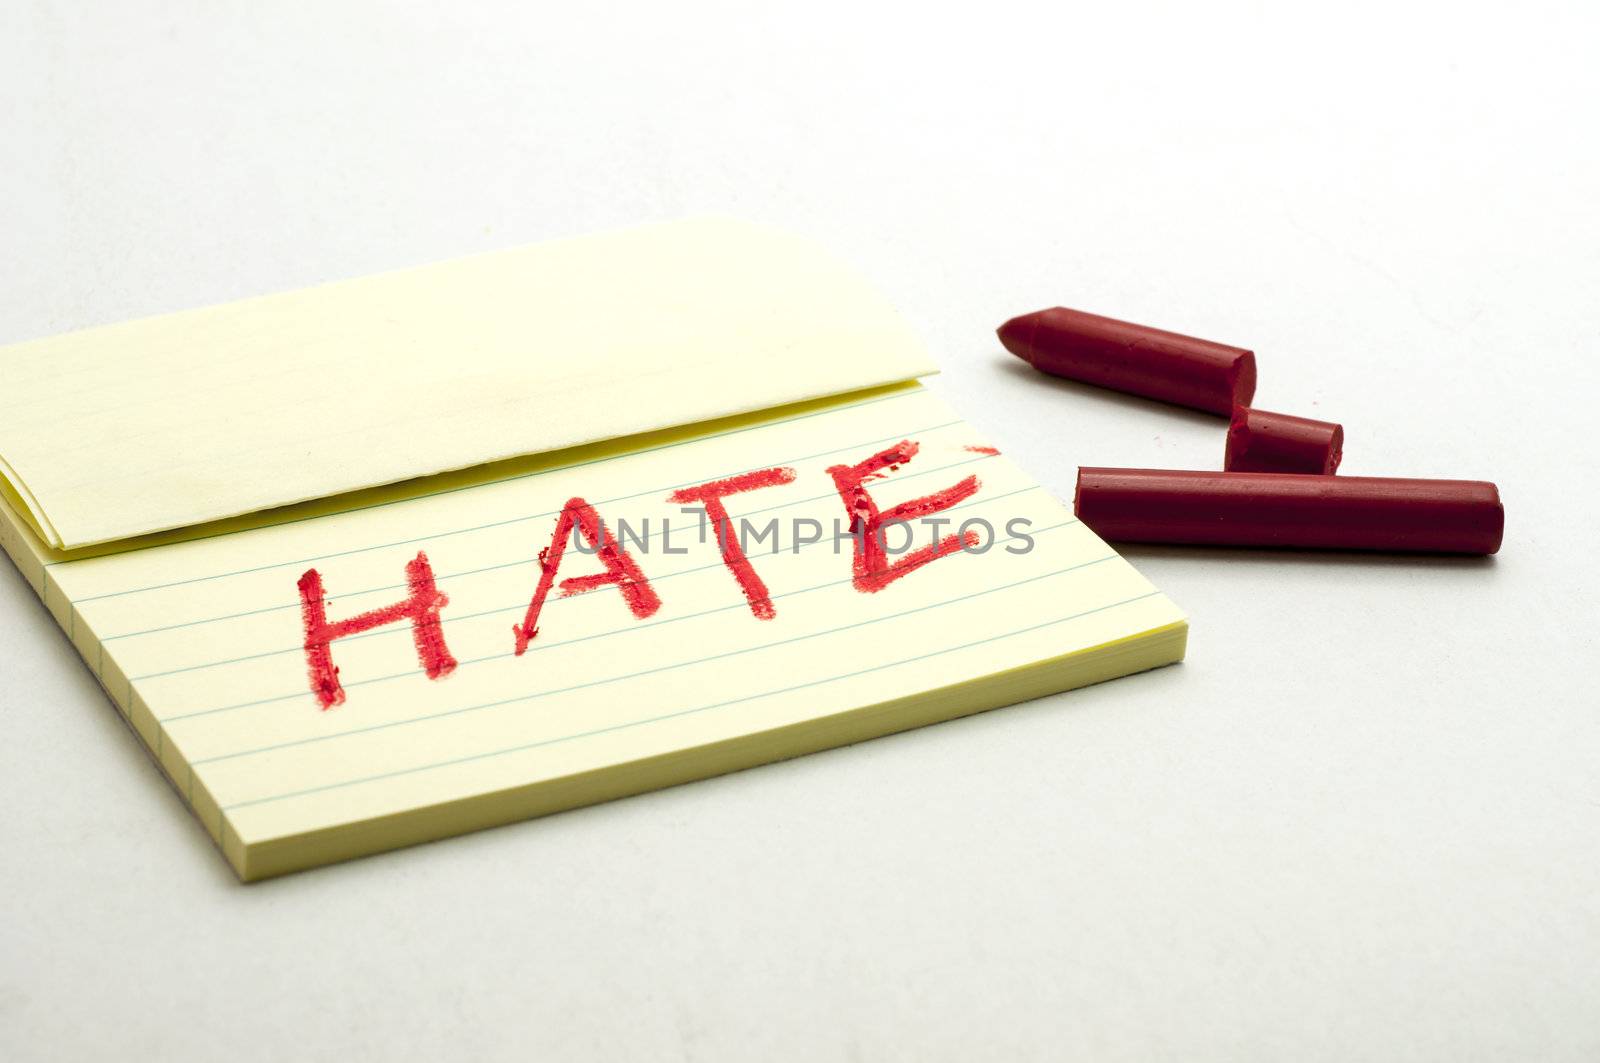 Handwriting hate with crayon